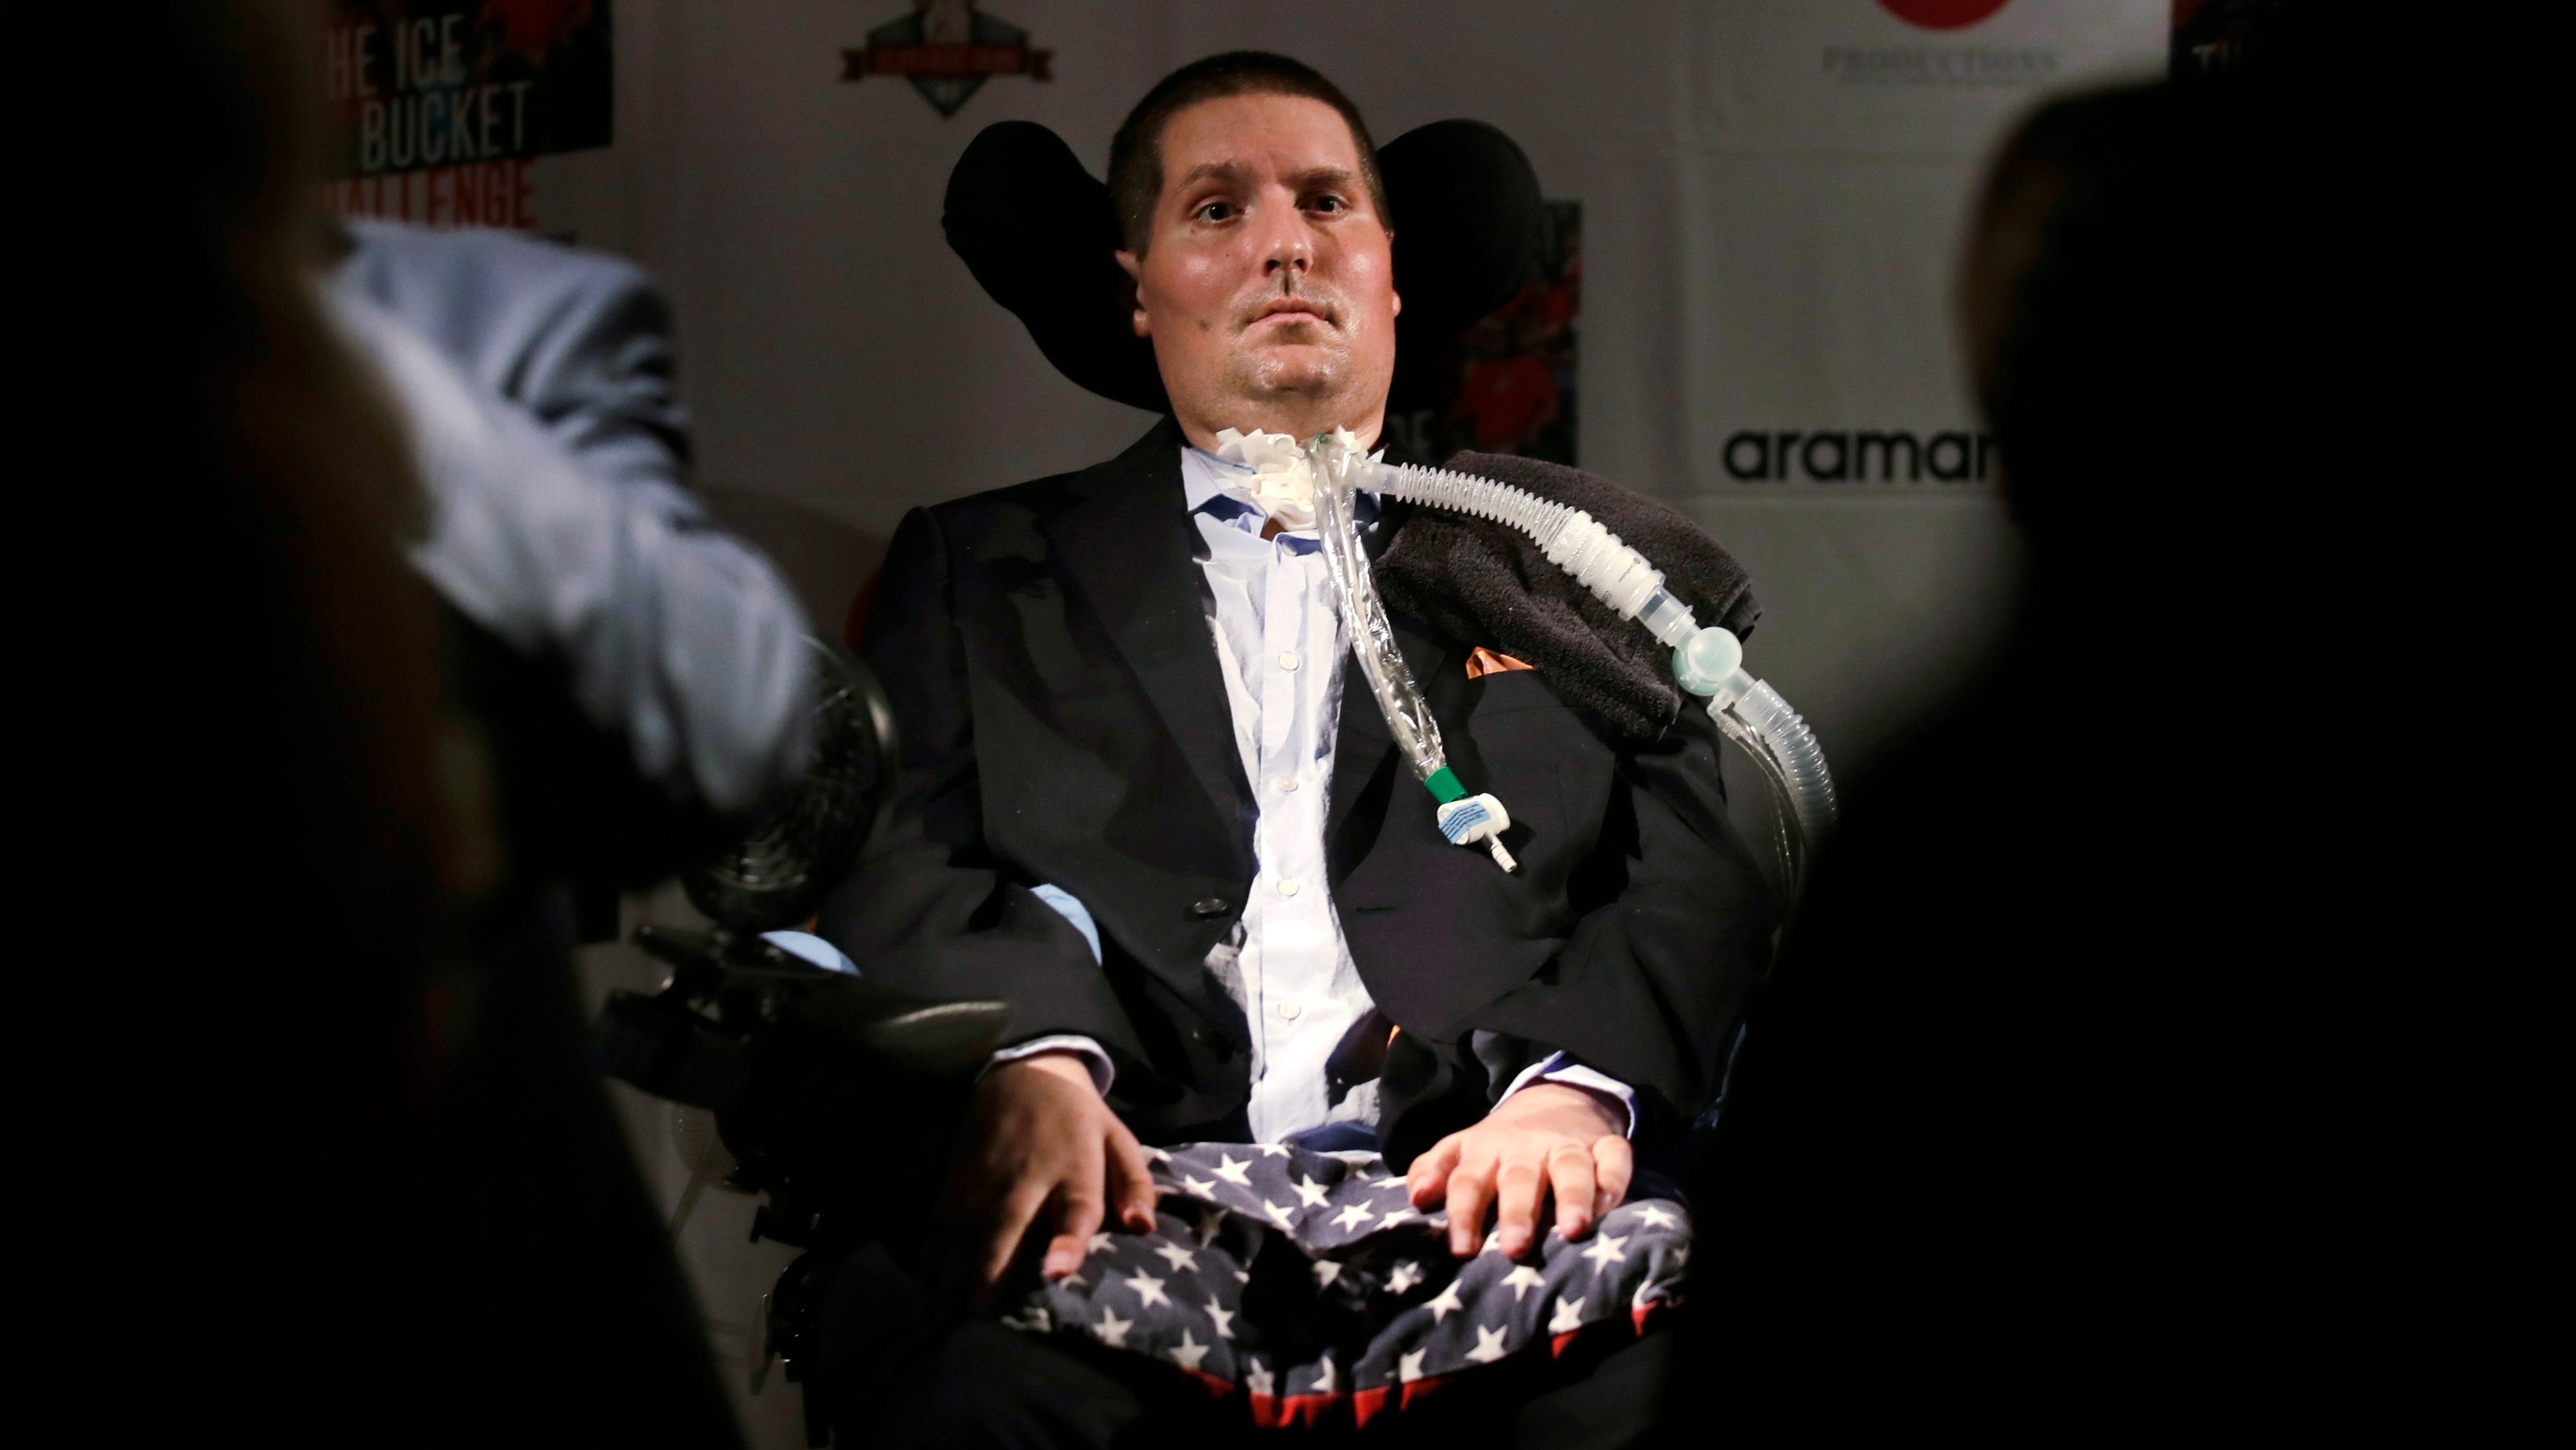 Former Boston College baseball star Pete Frates, champion of Ice Bucket Challenge, dies at 34 of ALS - USA TODAY